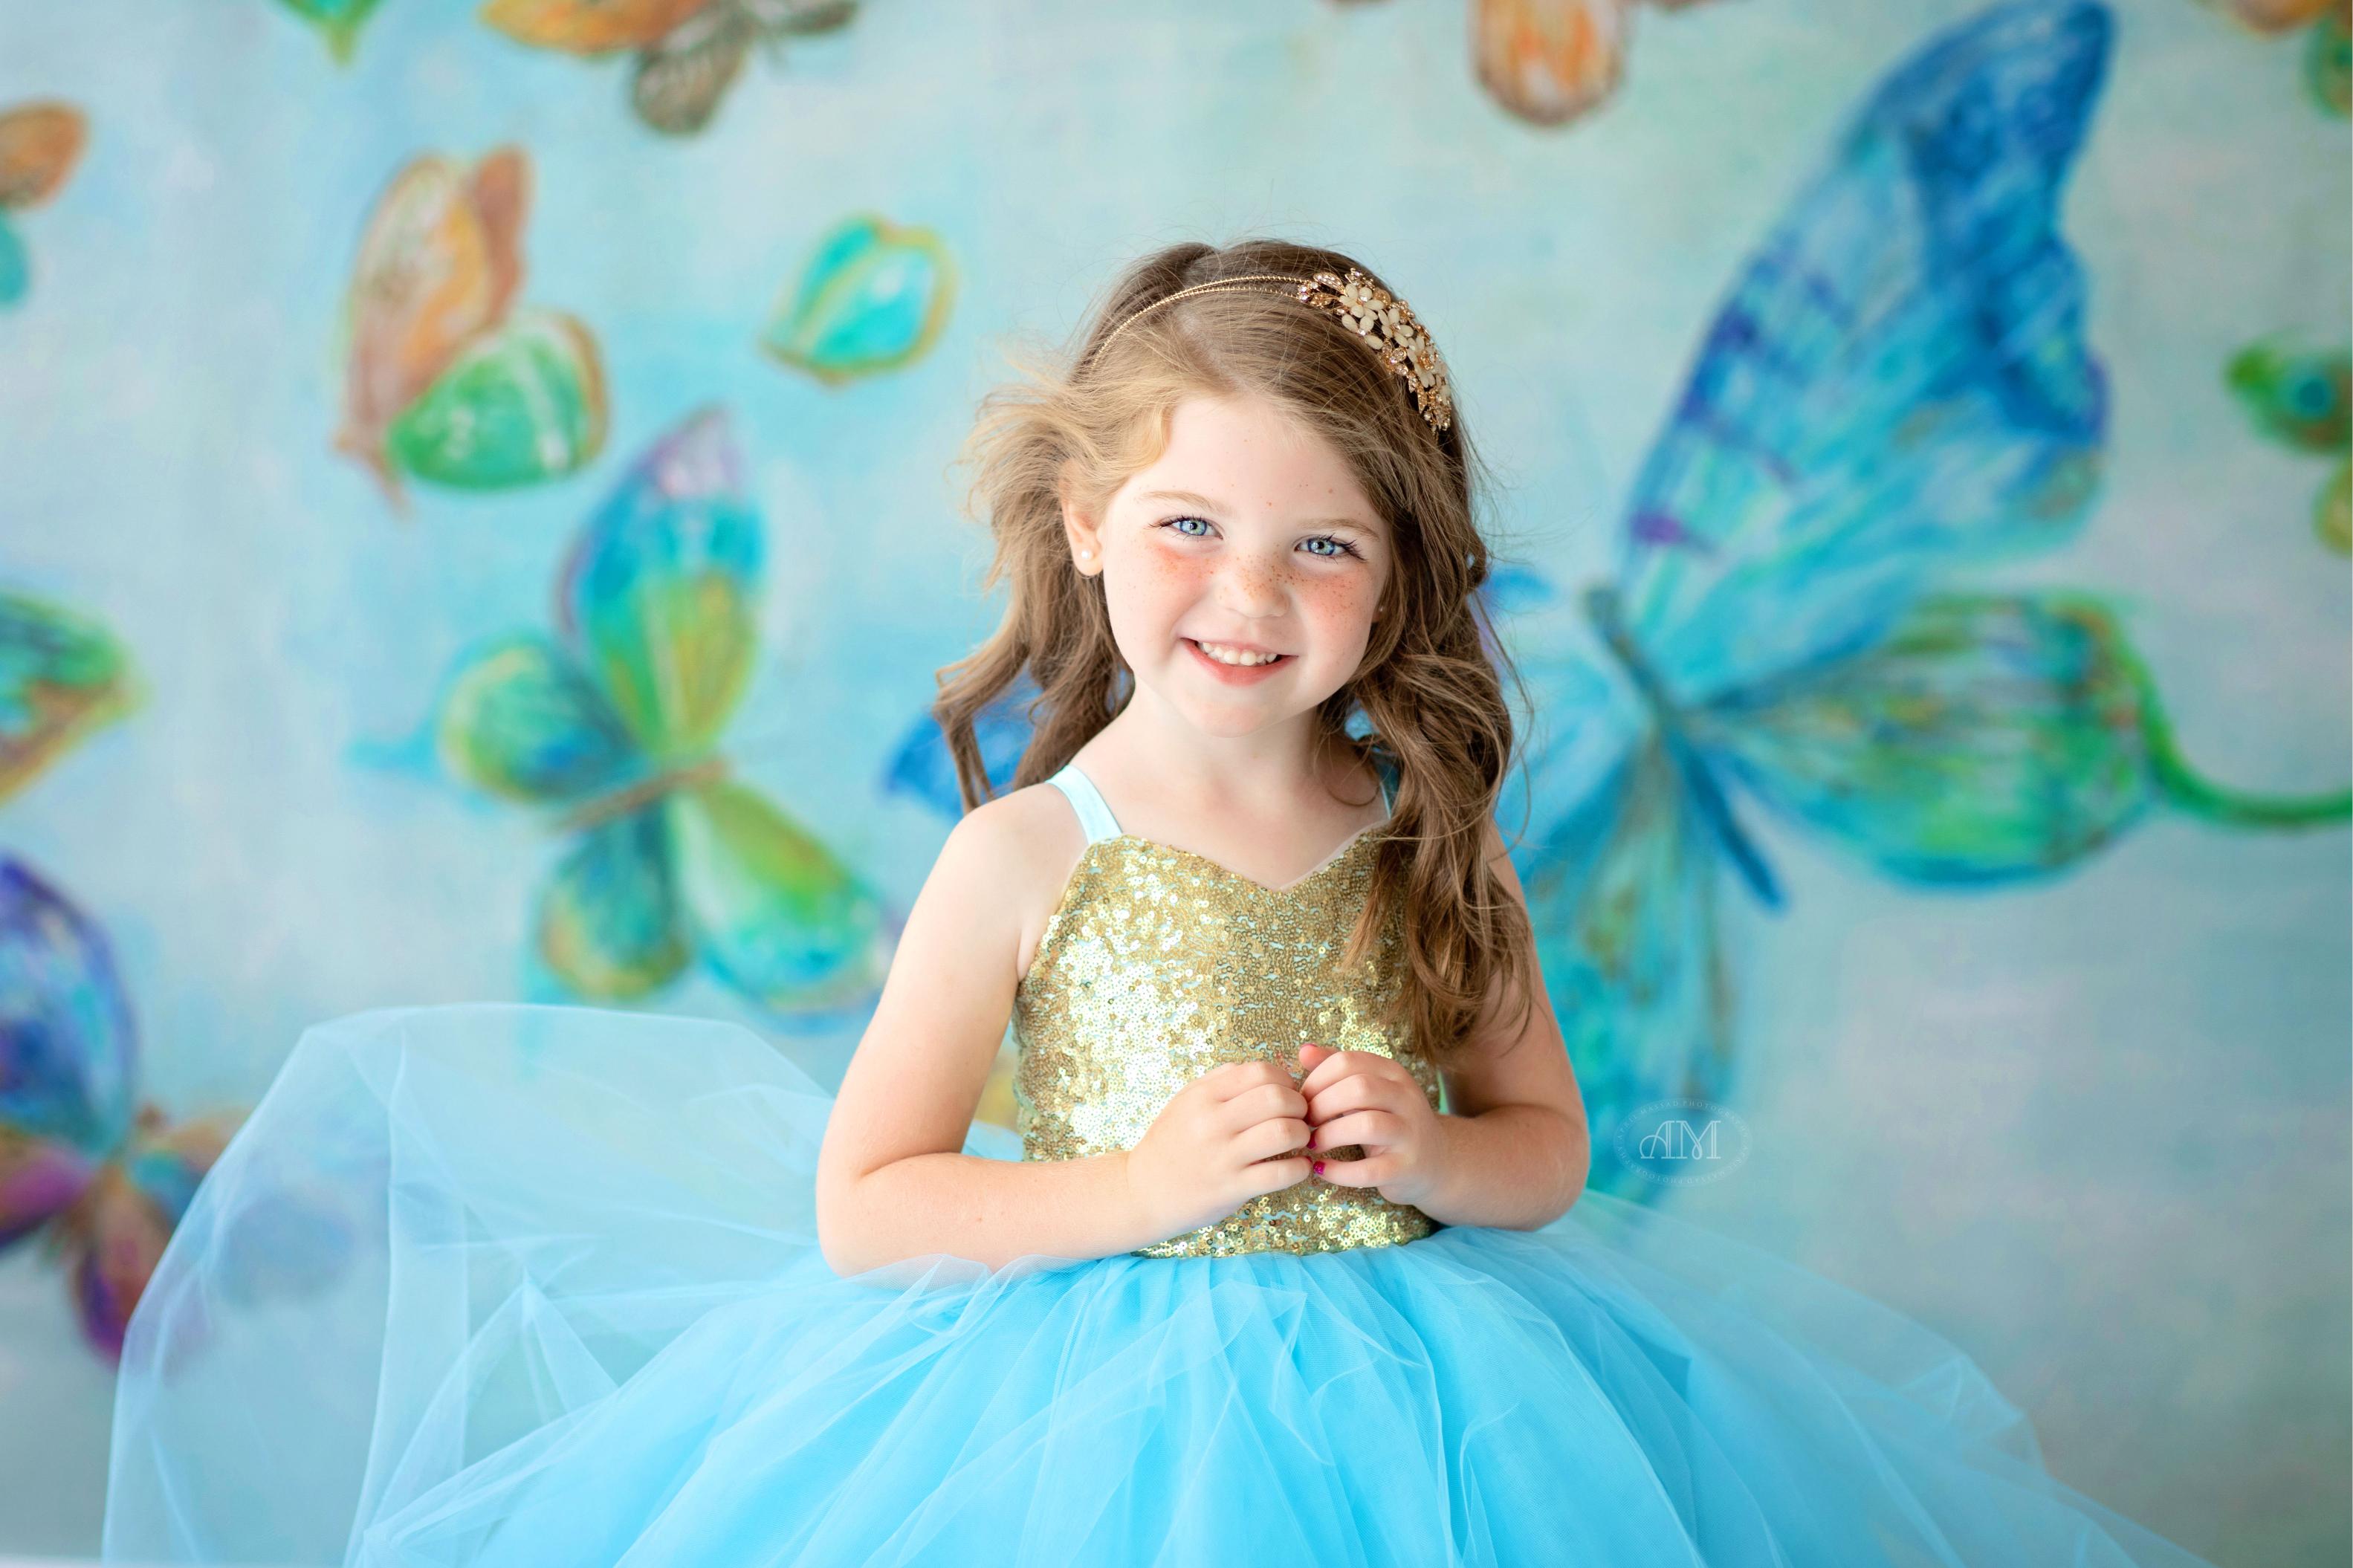  Layers of fluffy tulle for the ultimate twirl-worthy flower girl experience."